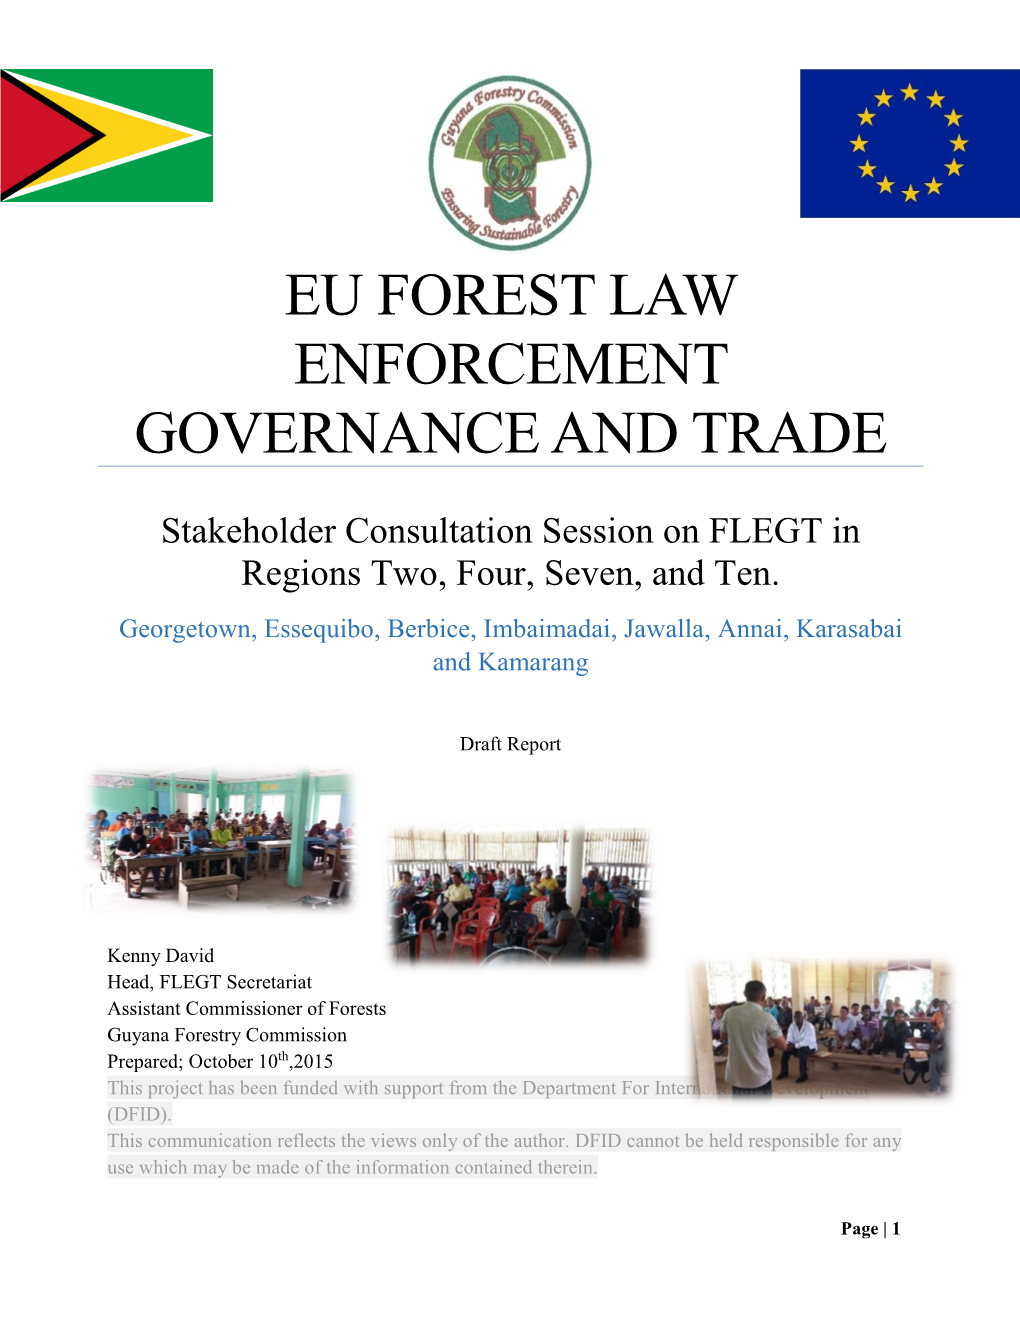 Eu Forest Law Enforcement Governance and Trade